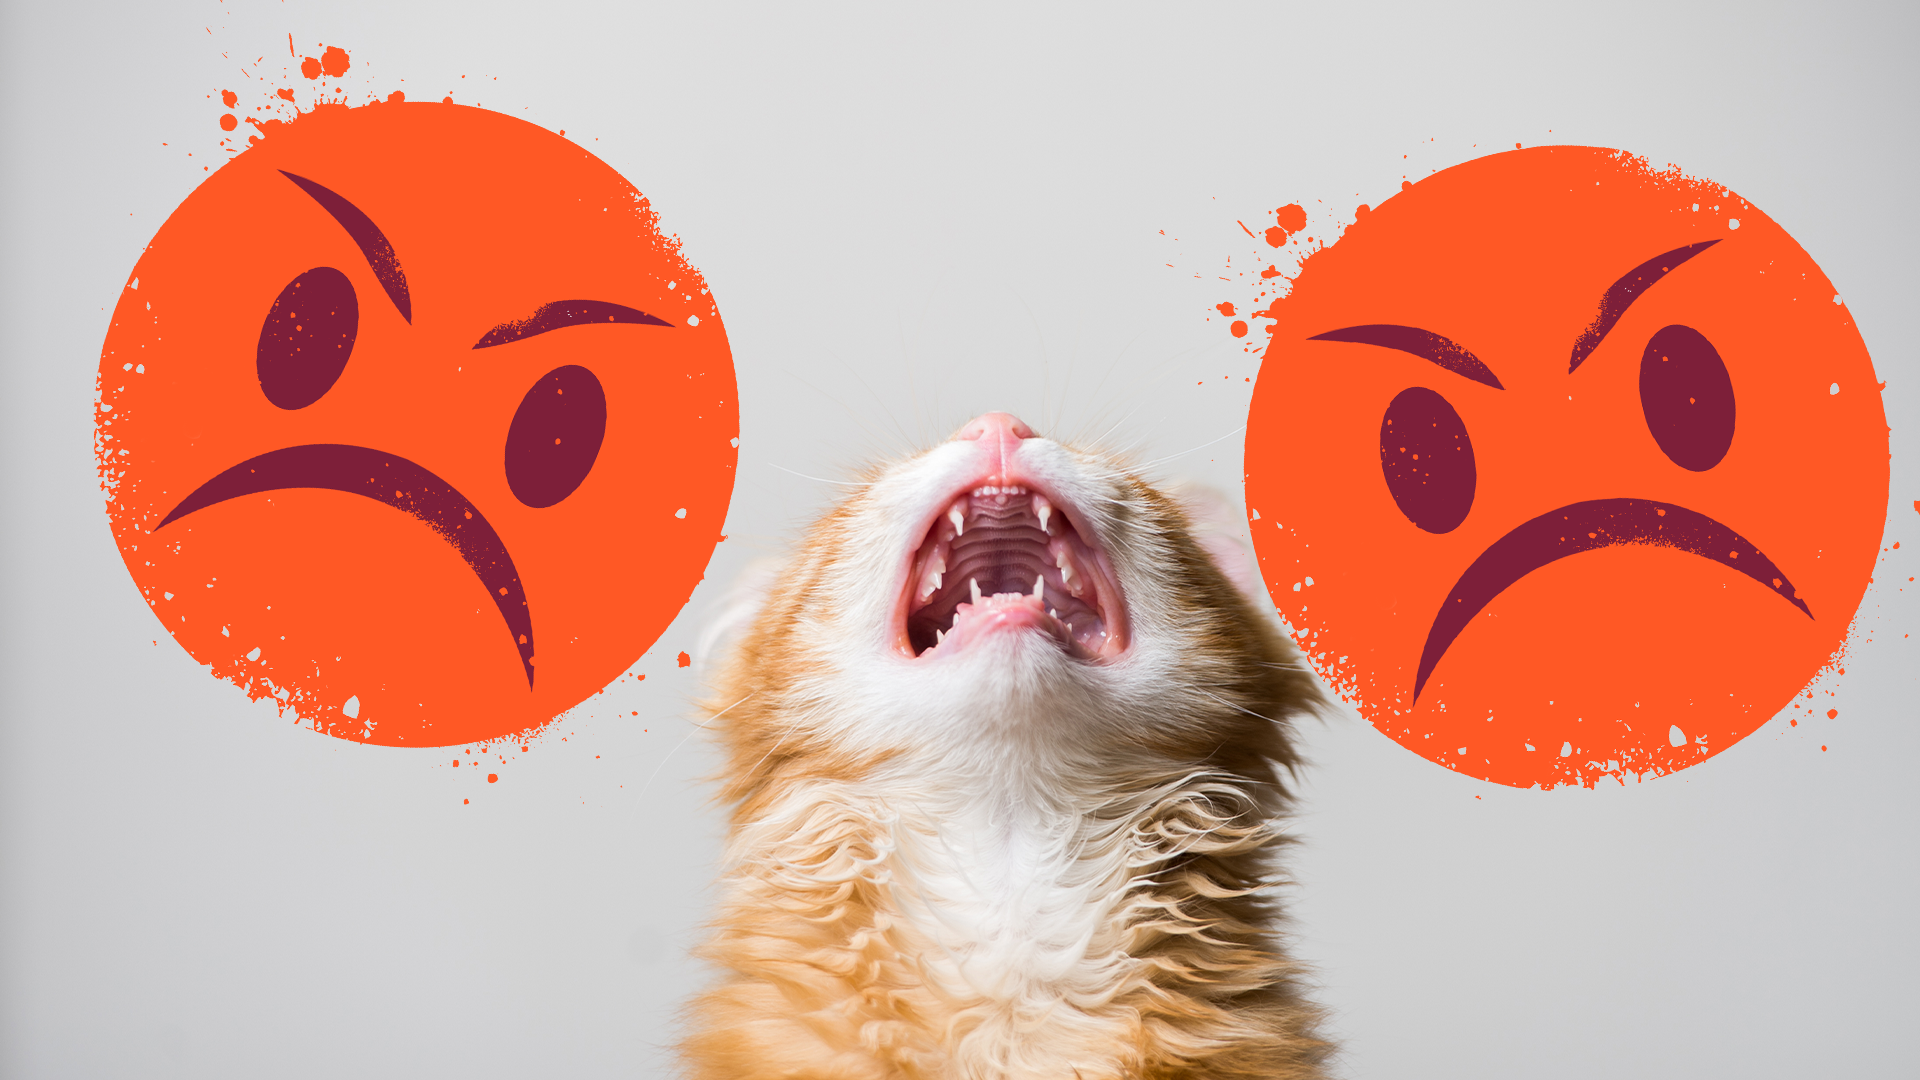 Angry cat and angry emojis